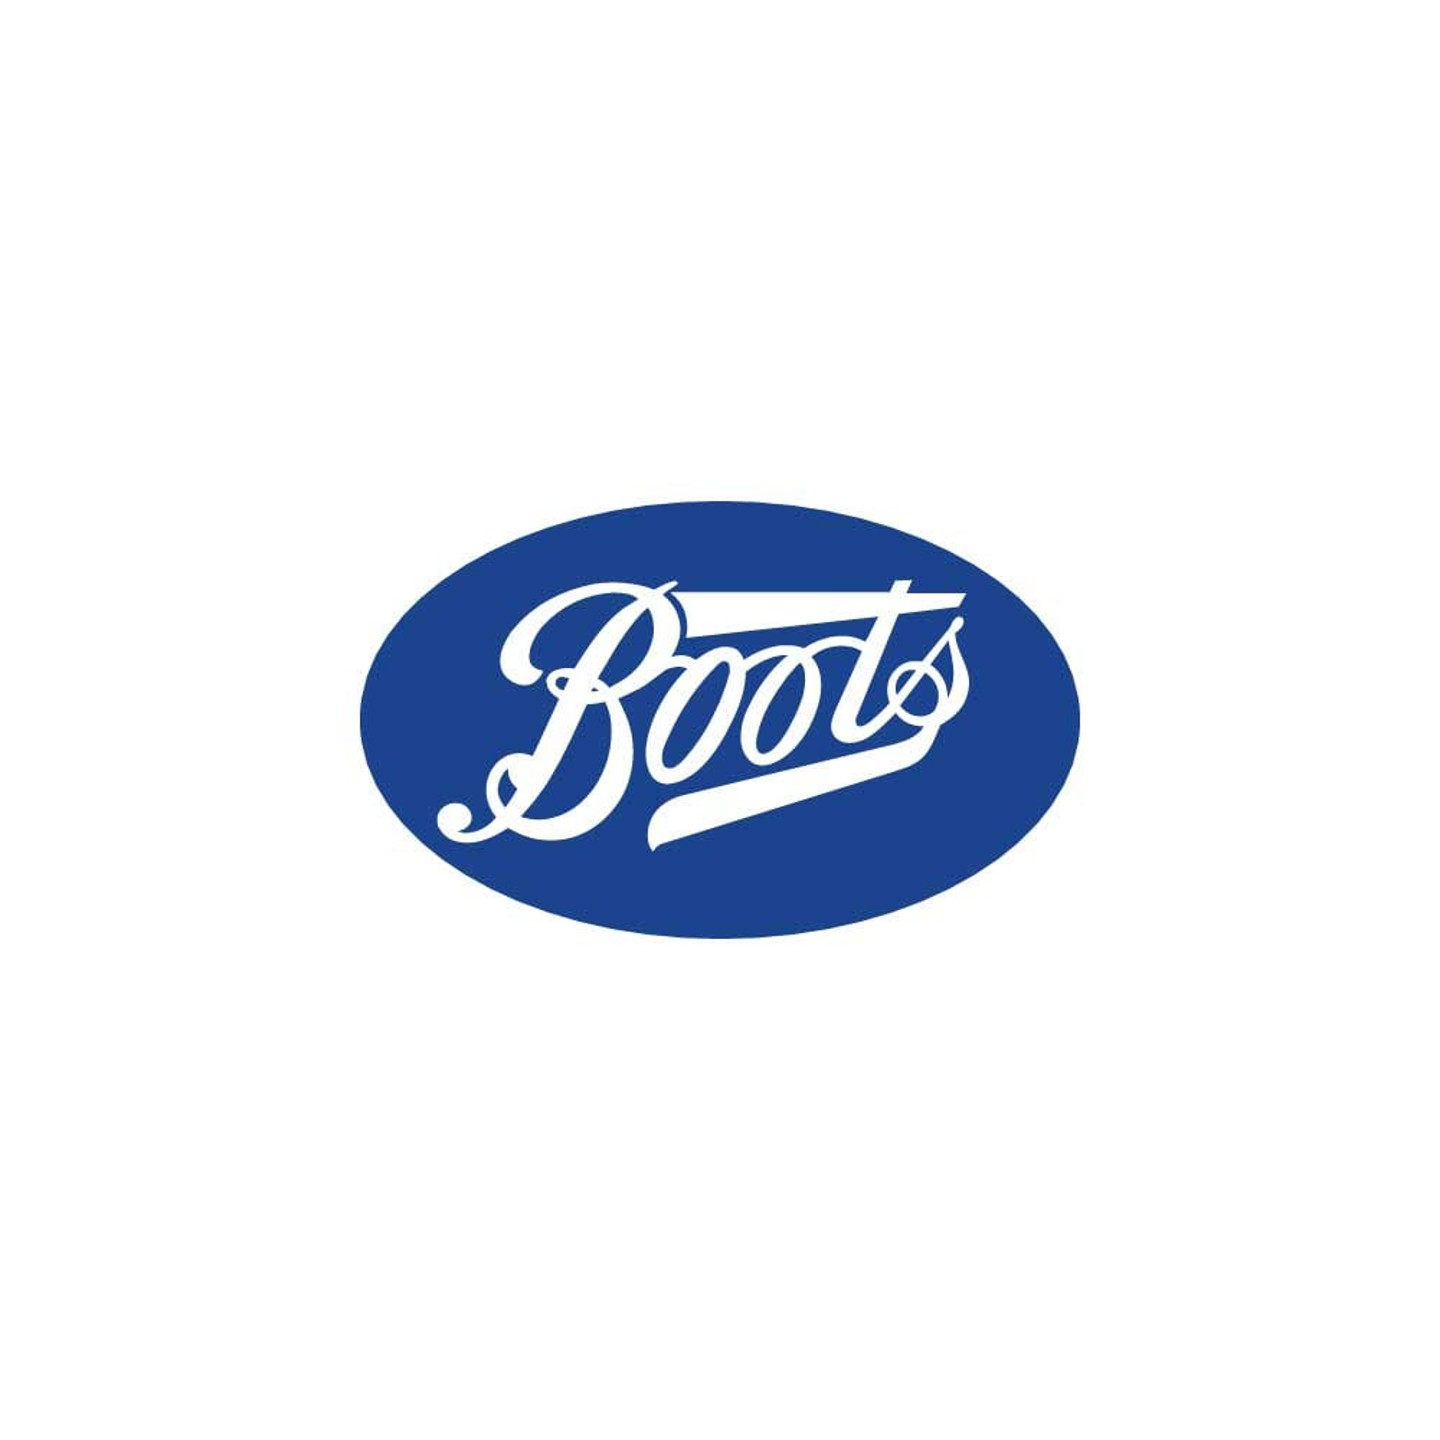 Boots Jersey